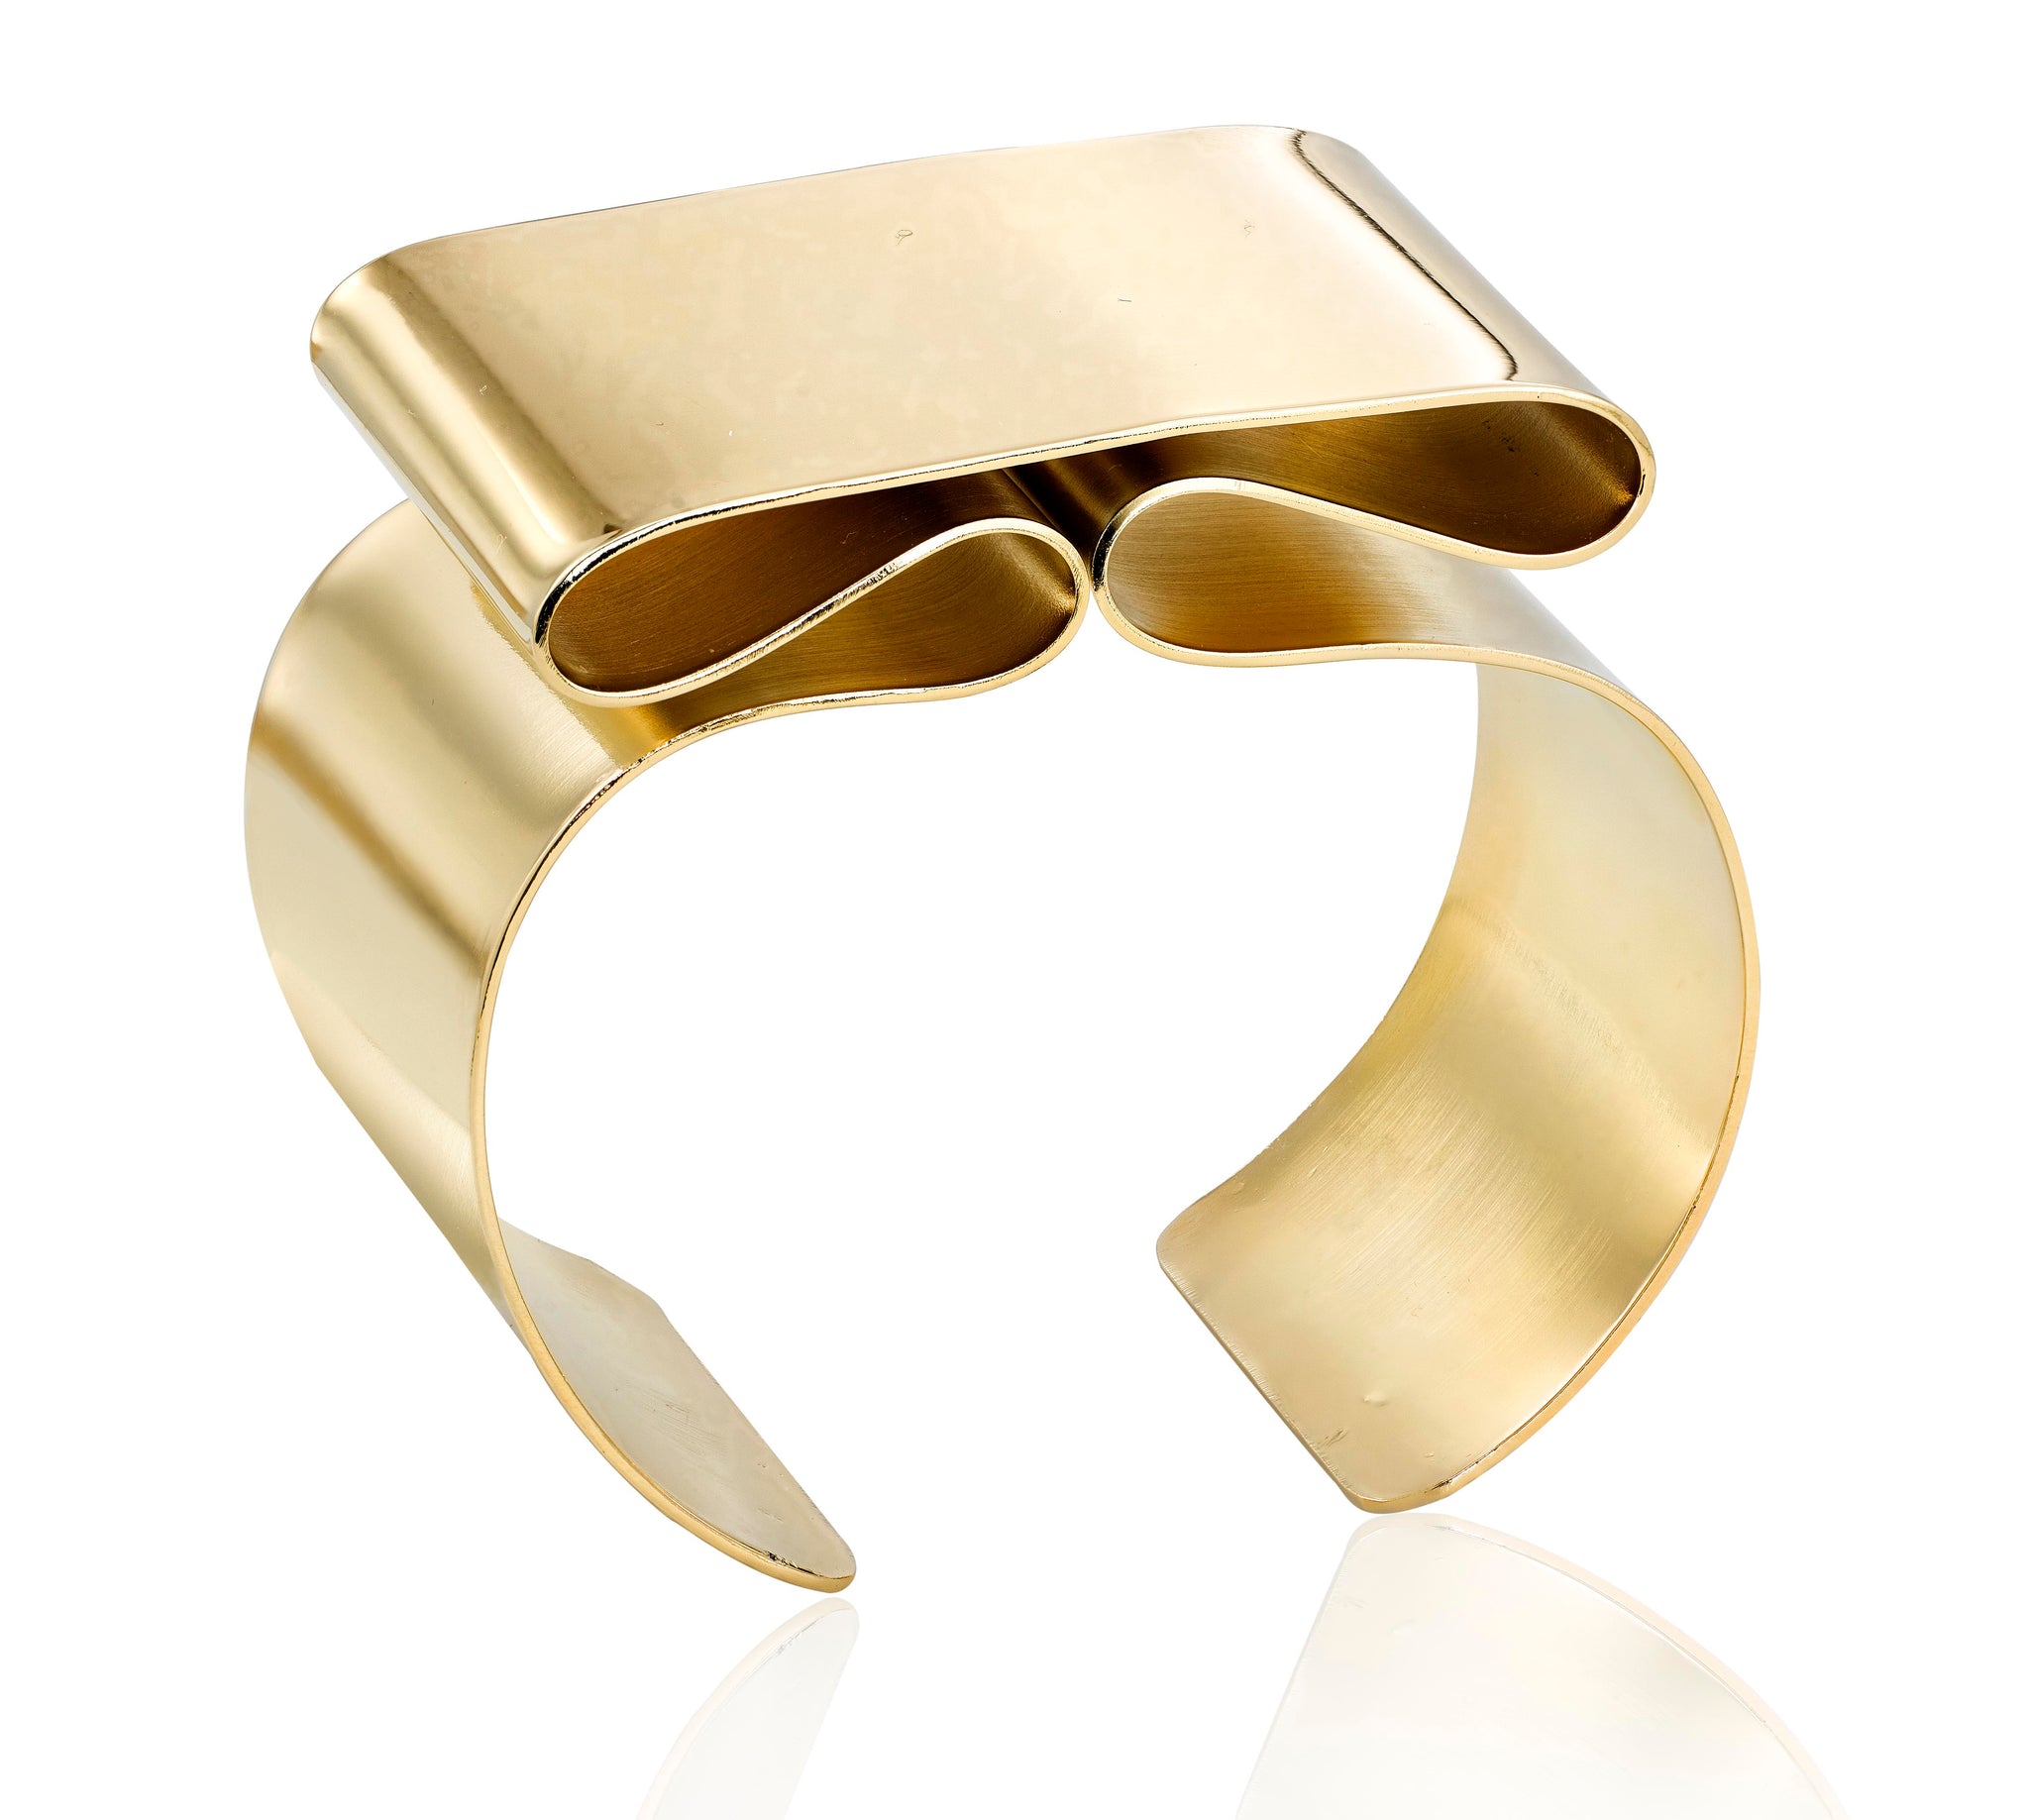 This is a sleek, polished and an everyday cuff bangle bracelet.Each piece is hand formed, from a brass sheet. I named it Table mountain as it reminded me of the Australian mountain that has such an interesting flat top.   Bracelet is fabricated which means it can be easily adjusted to fit any wrist.   ~ 1.5" wide  ~ brass sheet, finished with 14k gold plating  ~ nickel free